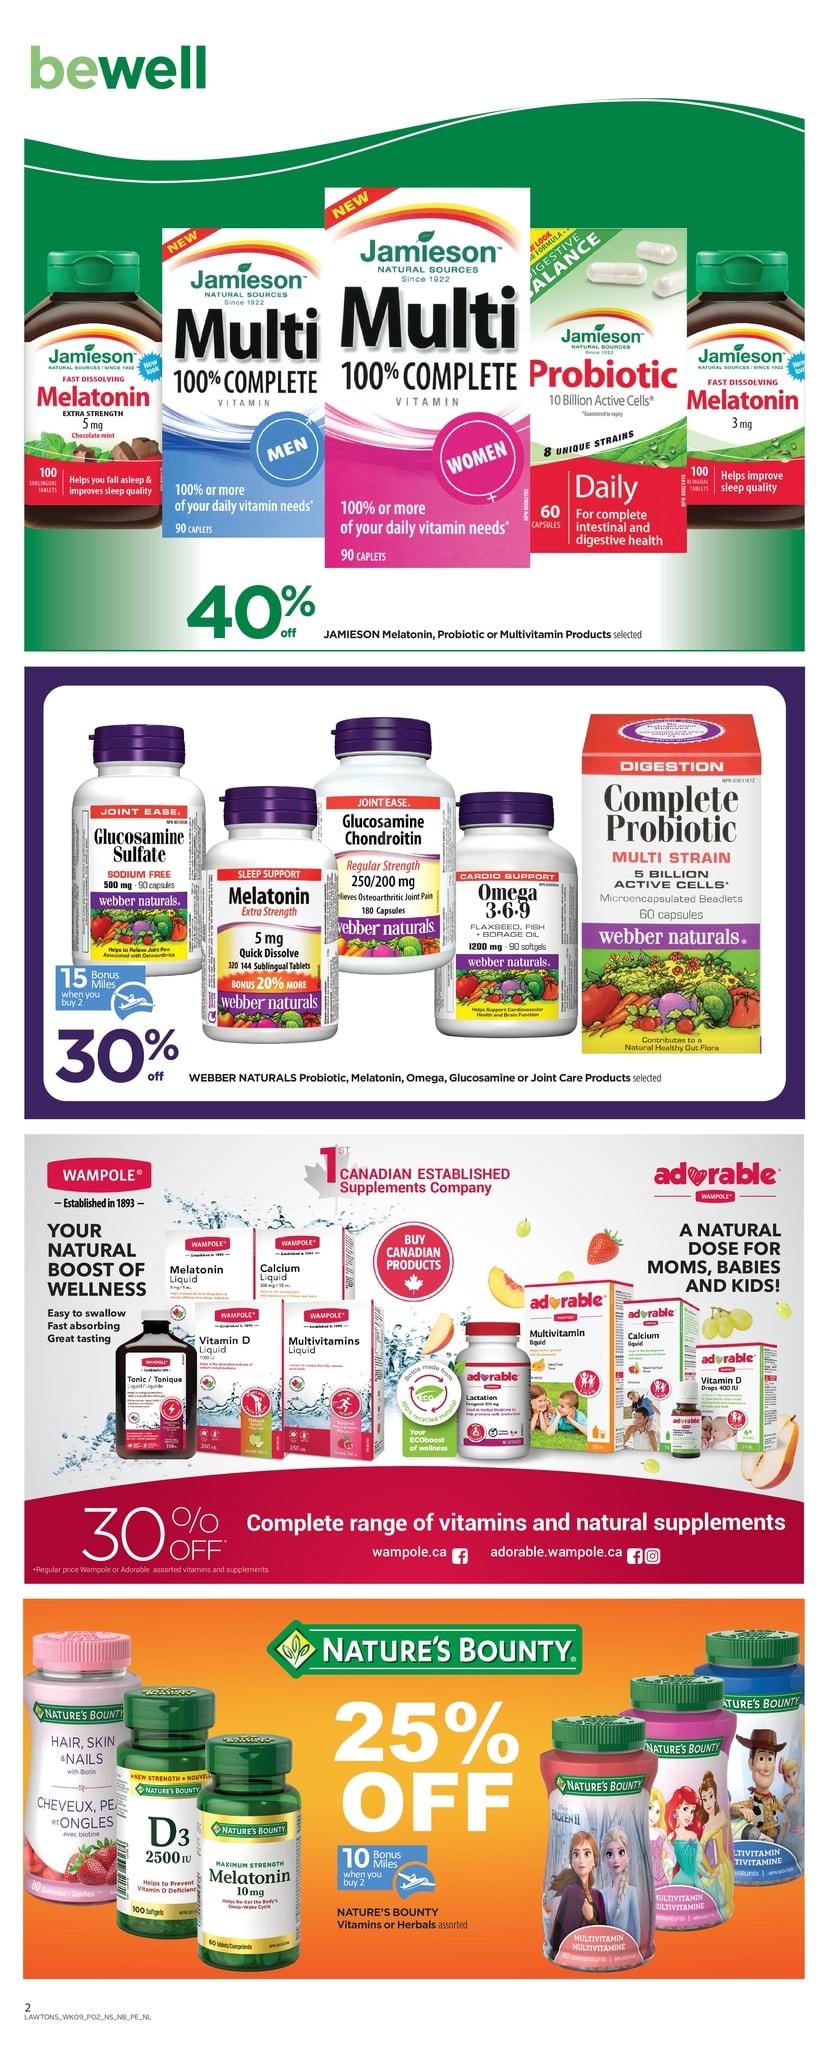 Lawtons Drugs - Weekly Flyer Specials - Page 2